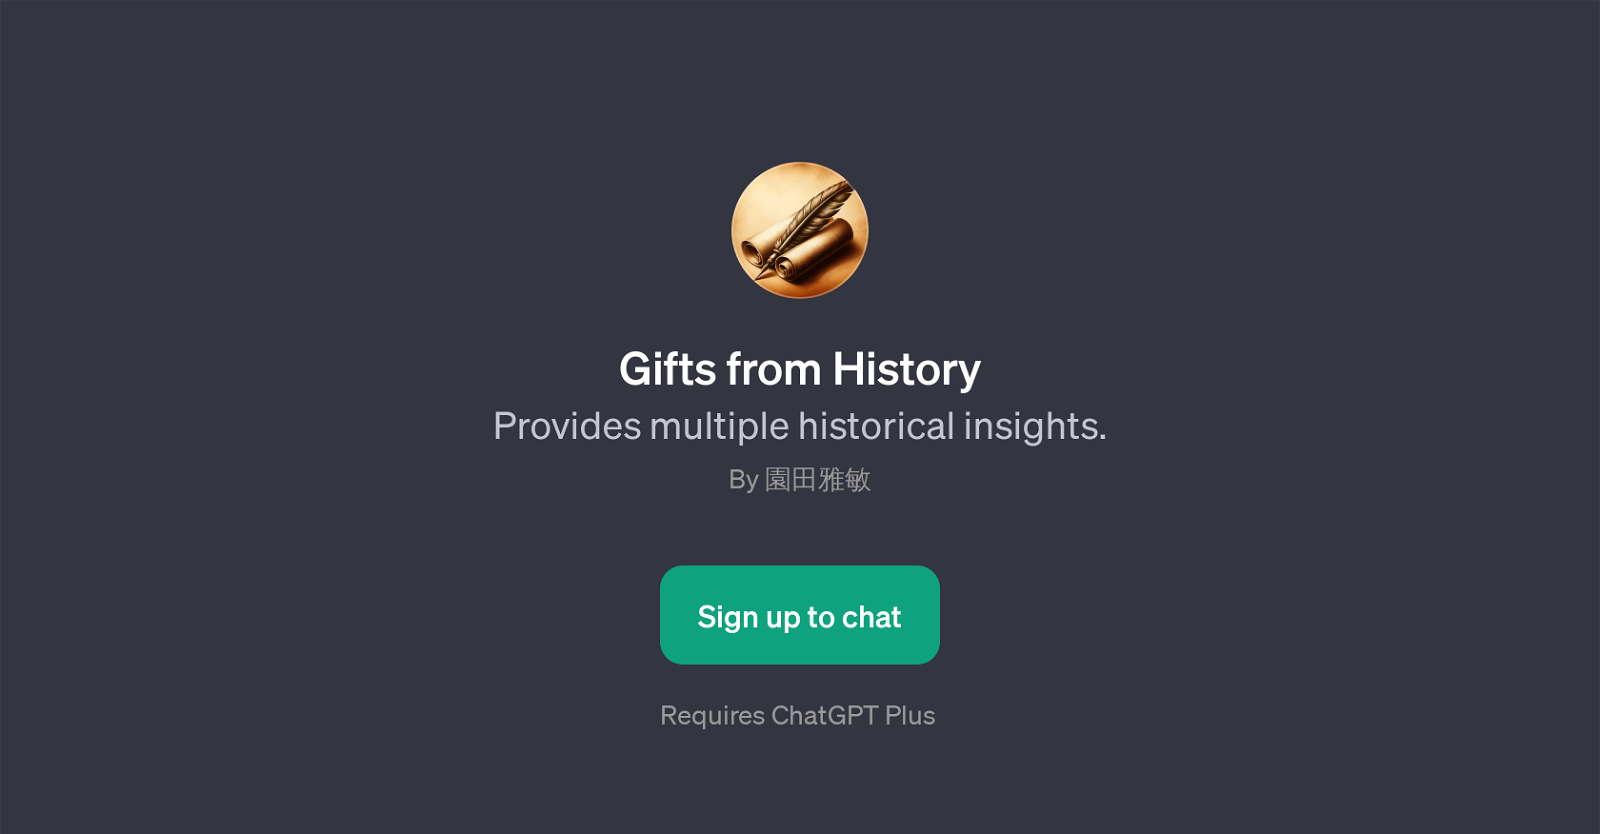 Gifts from History website